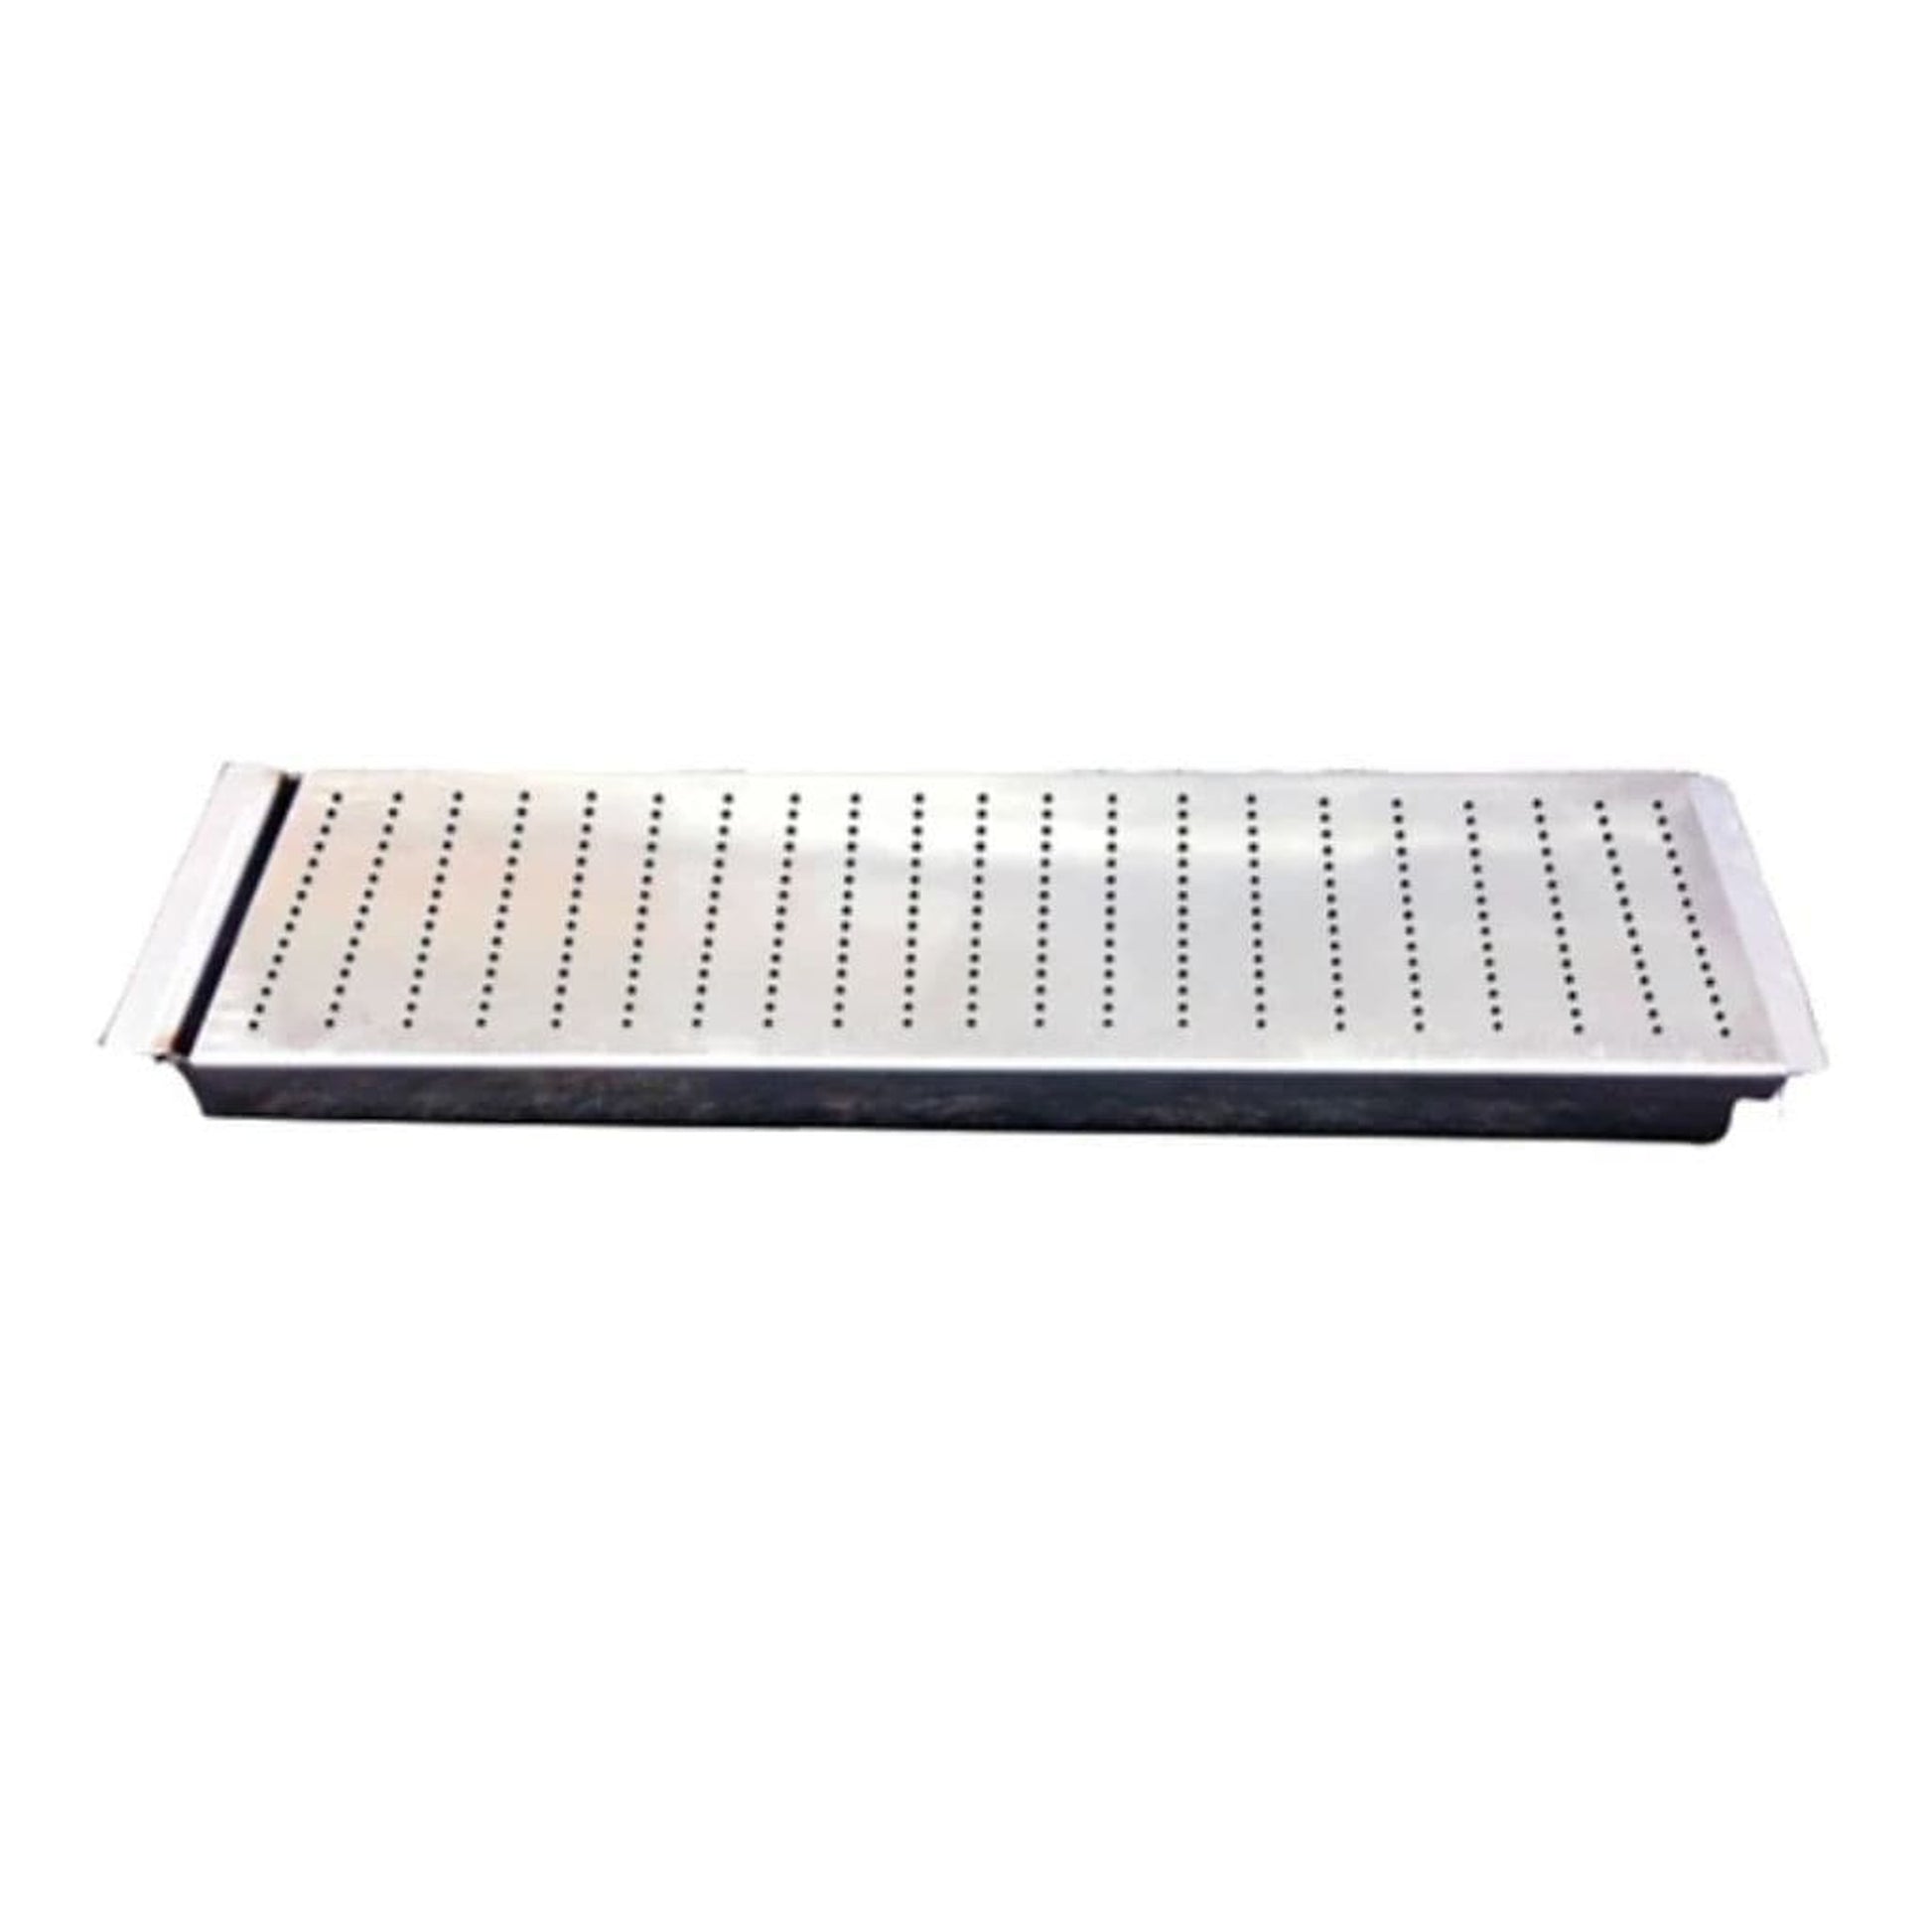 Summerset Smoker Tray Accessory for TRL Grills